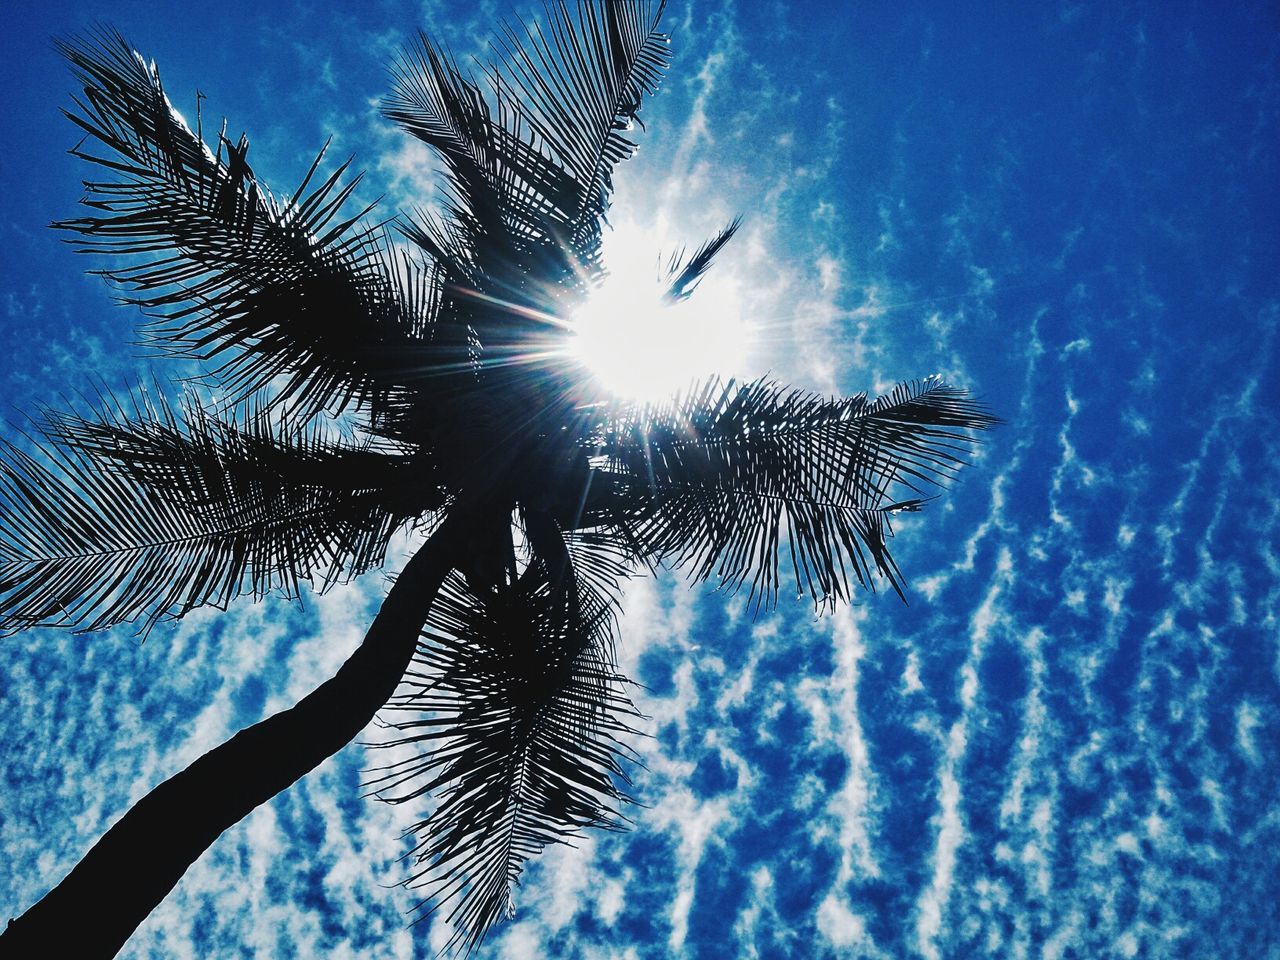 Low angle view of silhouette palm tree against cloudy sky